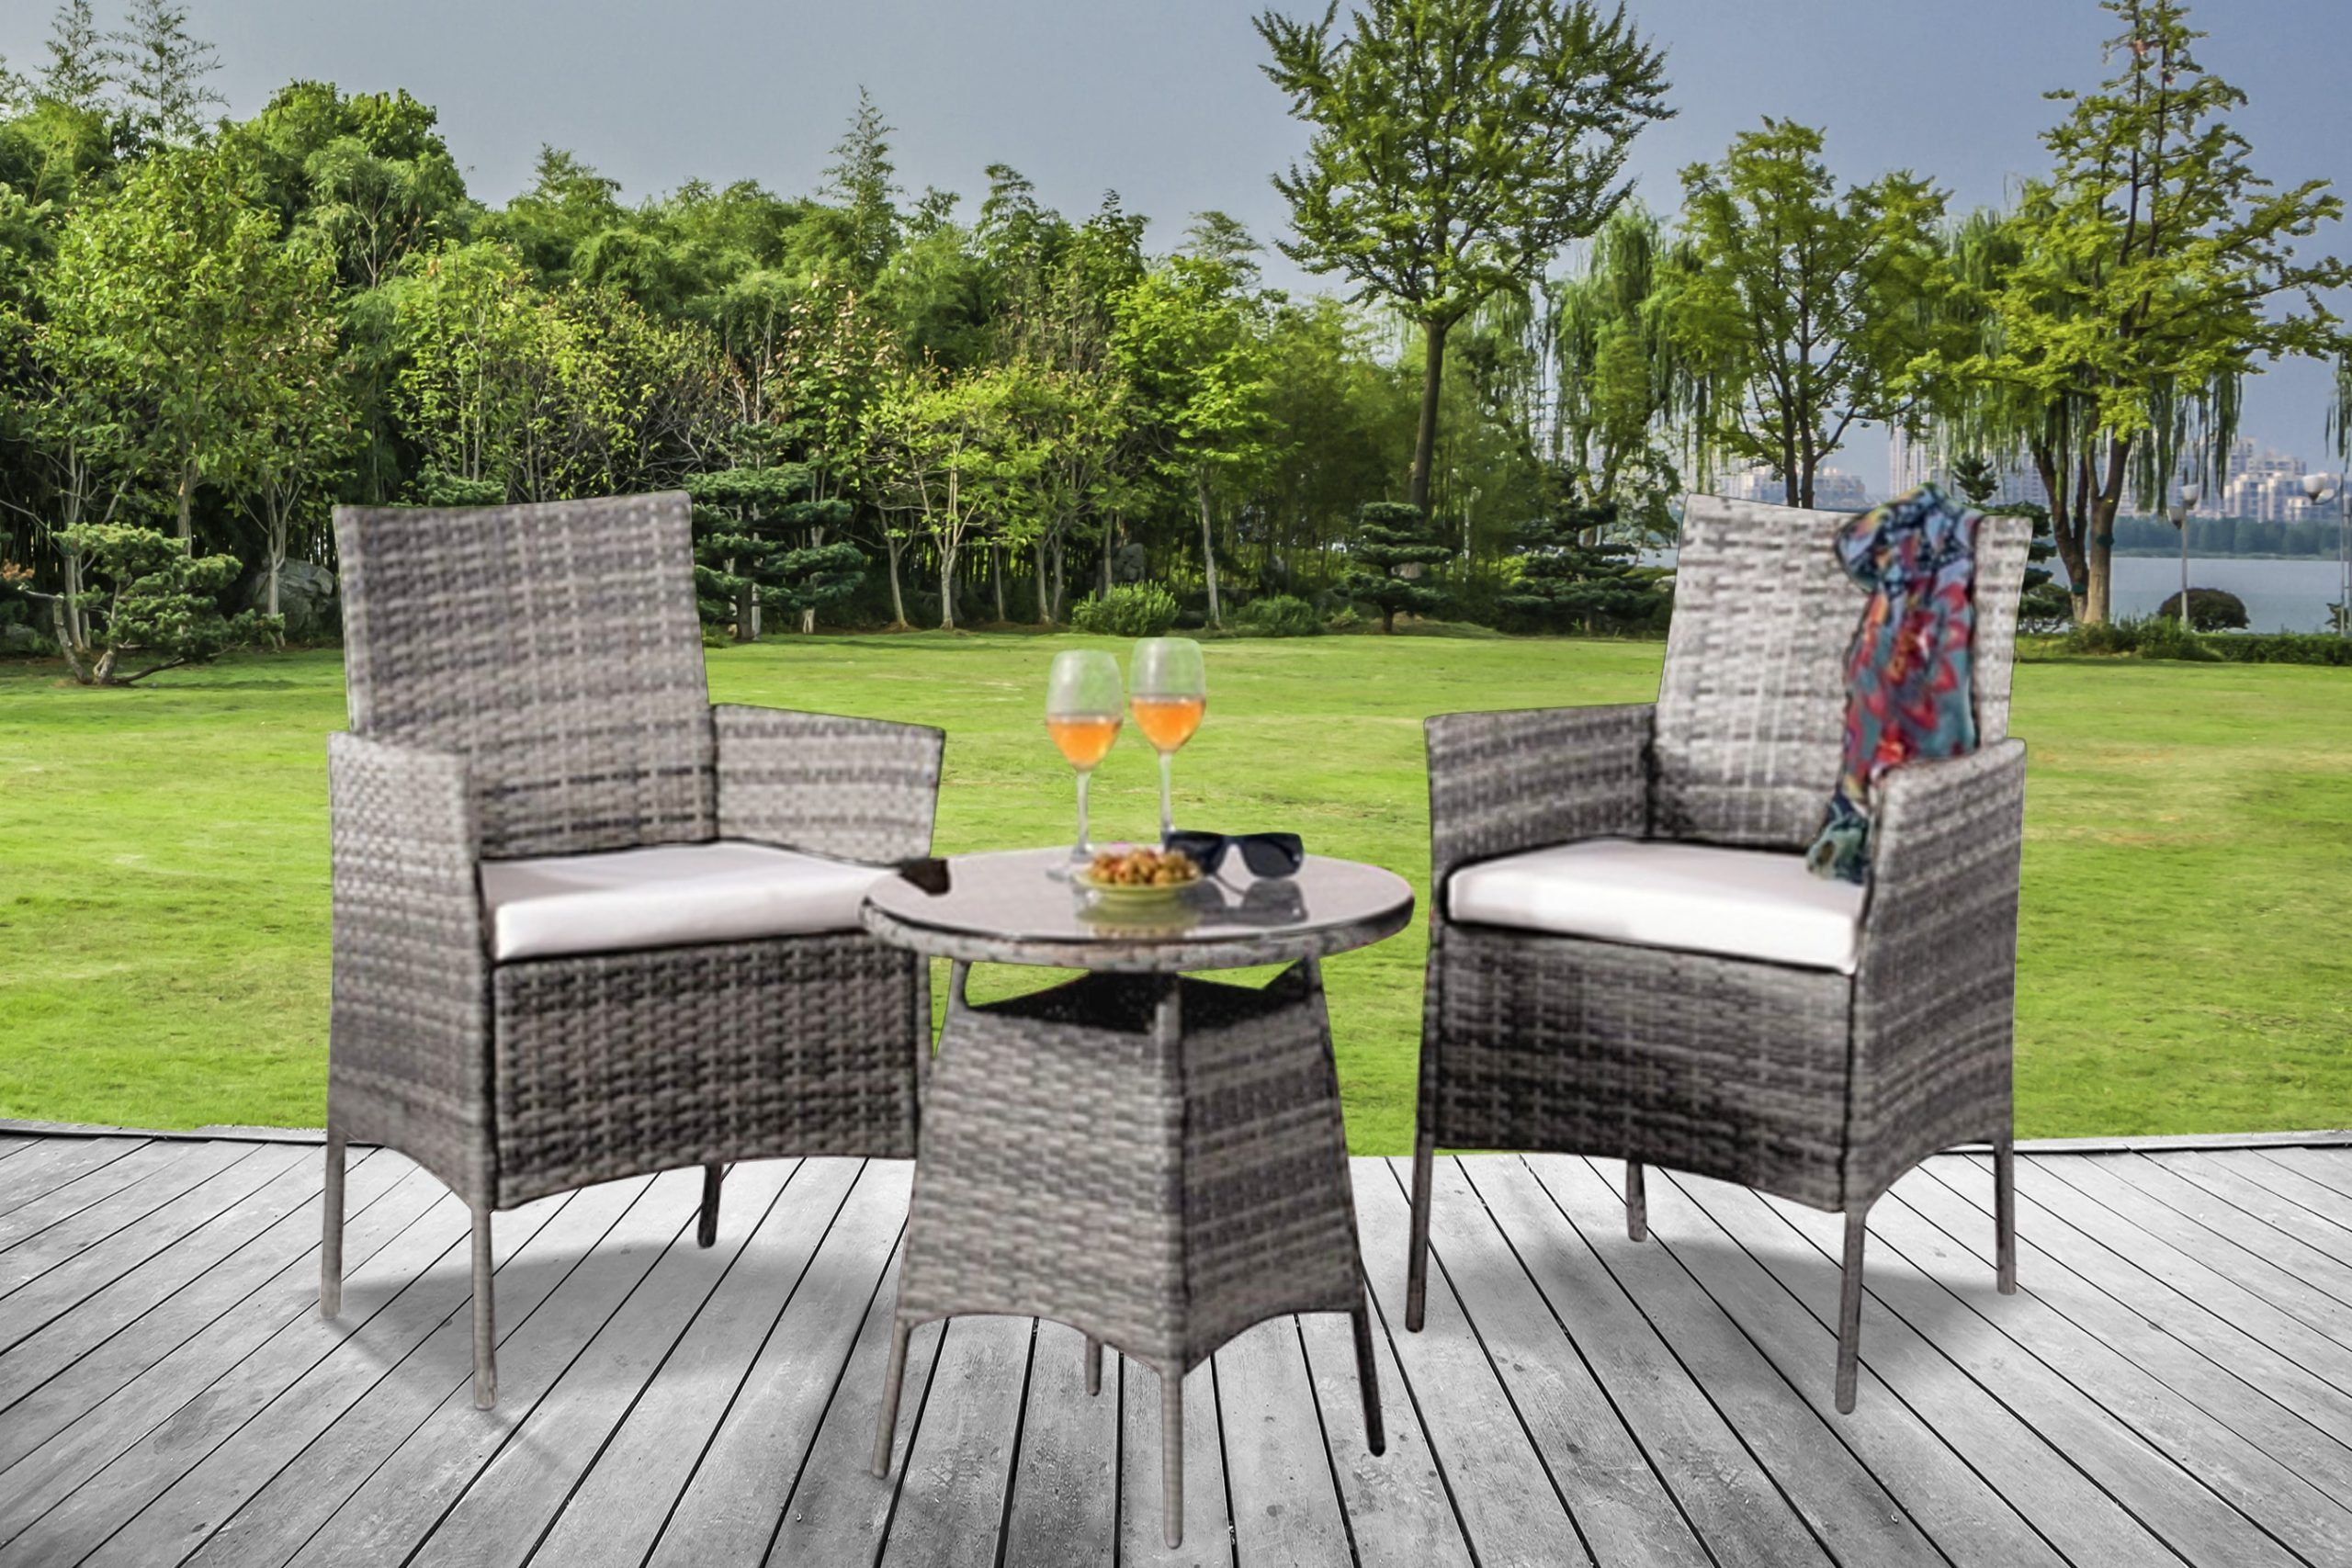 Two Seater Value Patio Set | Uk Furniture 4U In Natural All Weather Outdoor Seating Patio Sets (View 12 of 15)